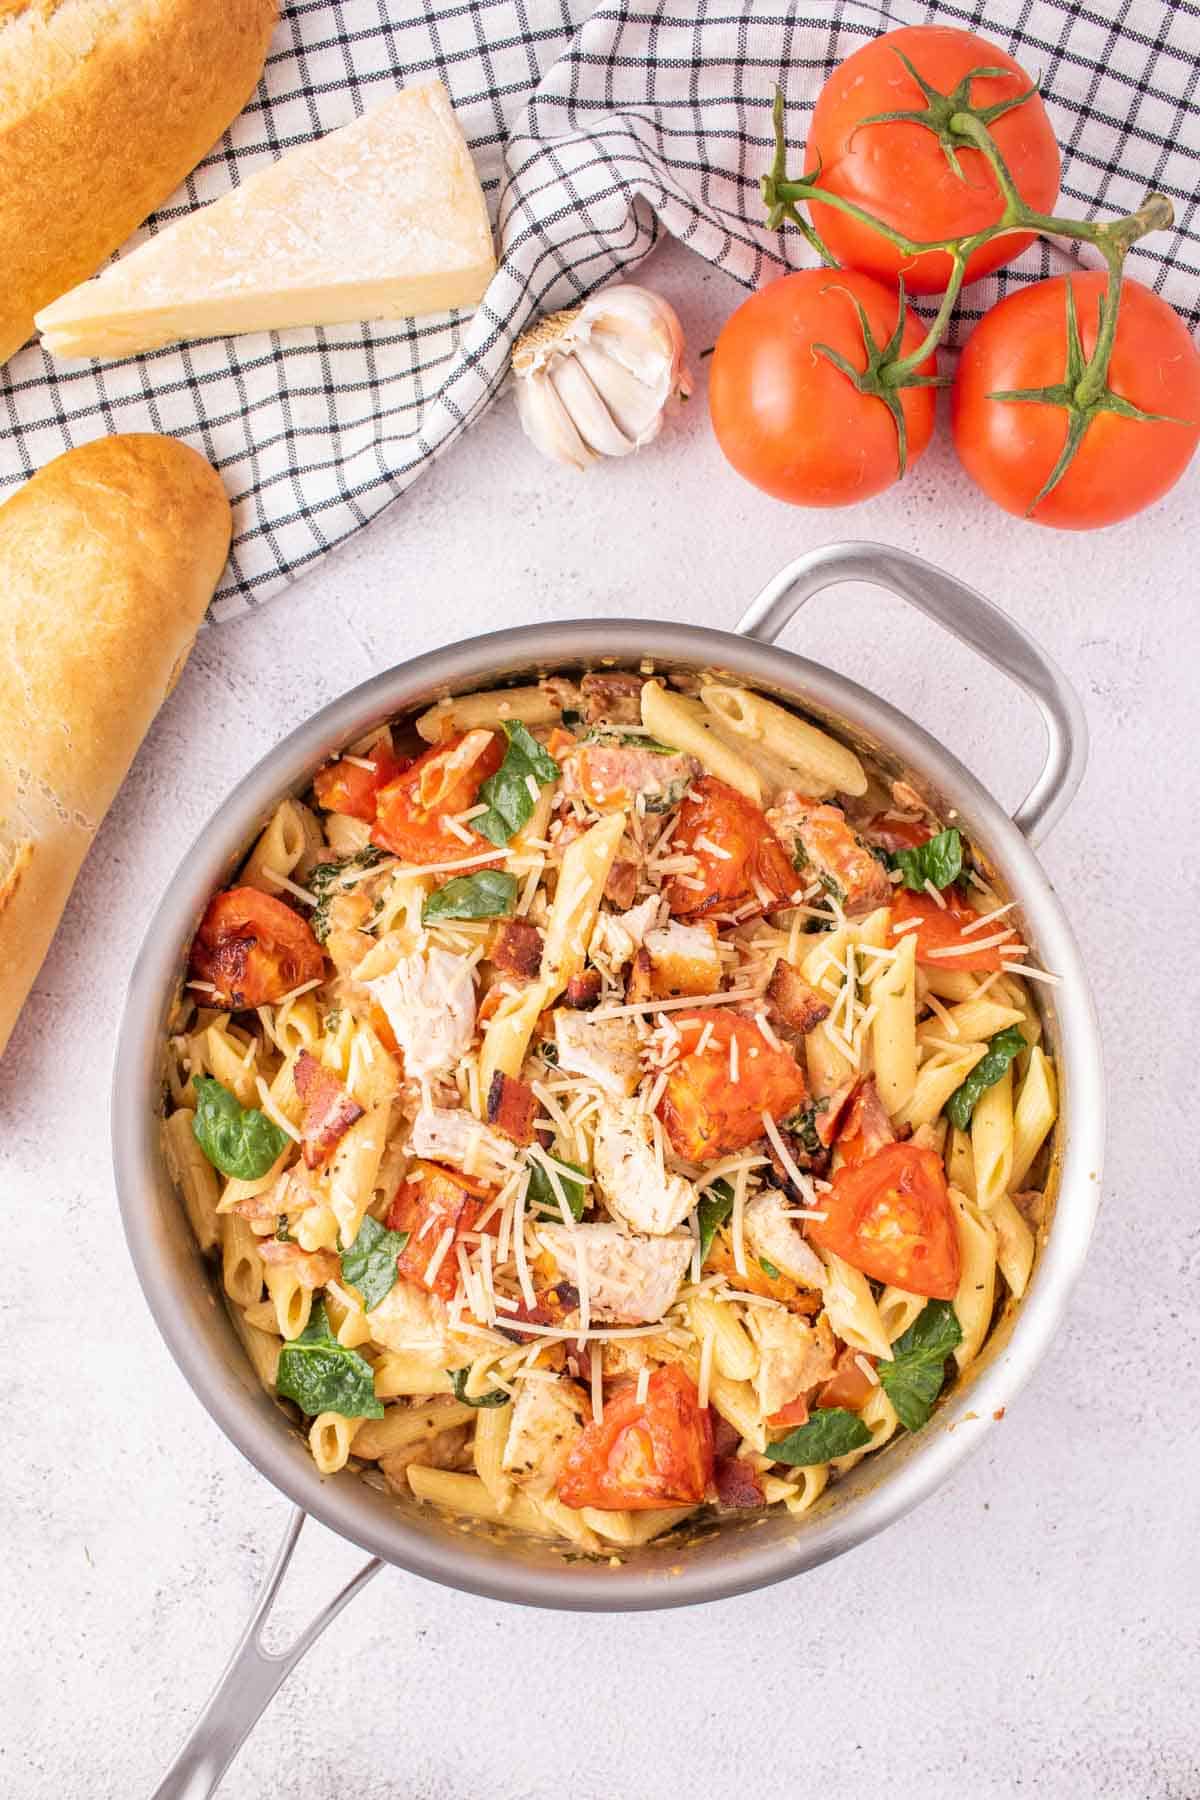 Chicken and bacon pasta in a stainless steel pot.